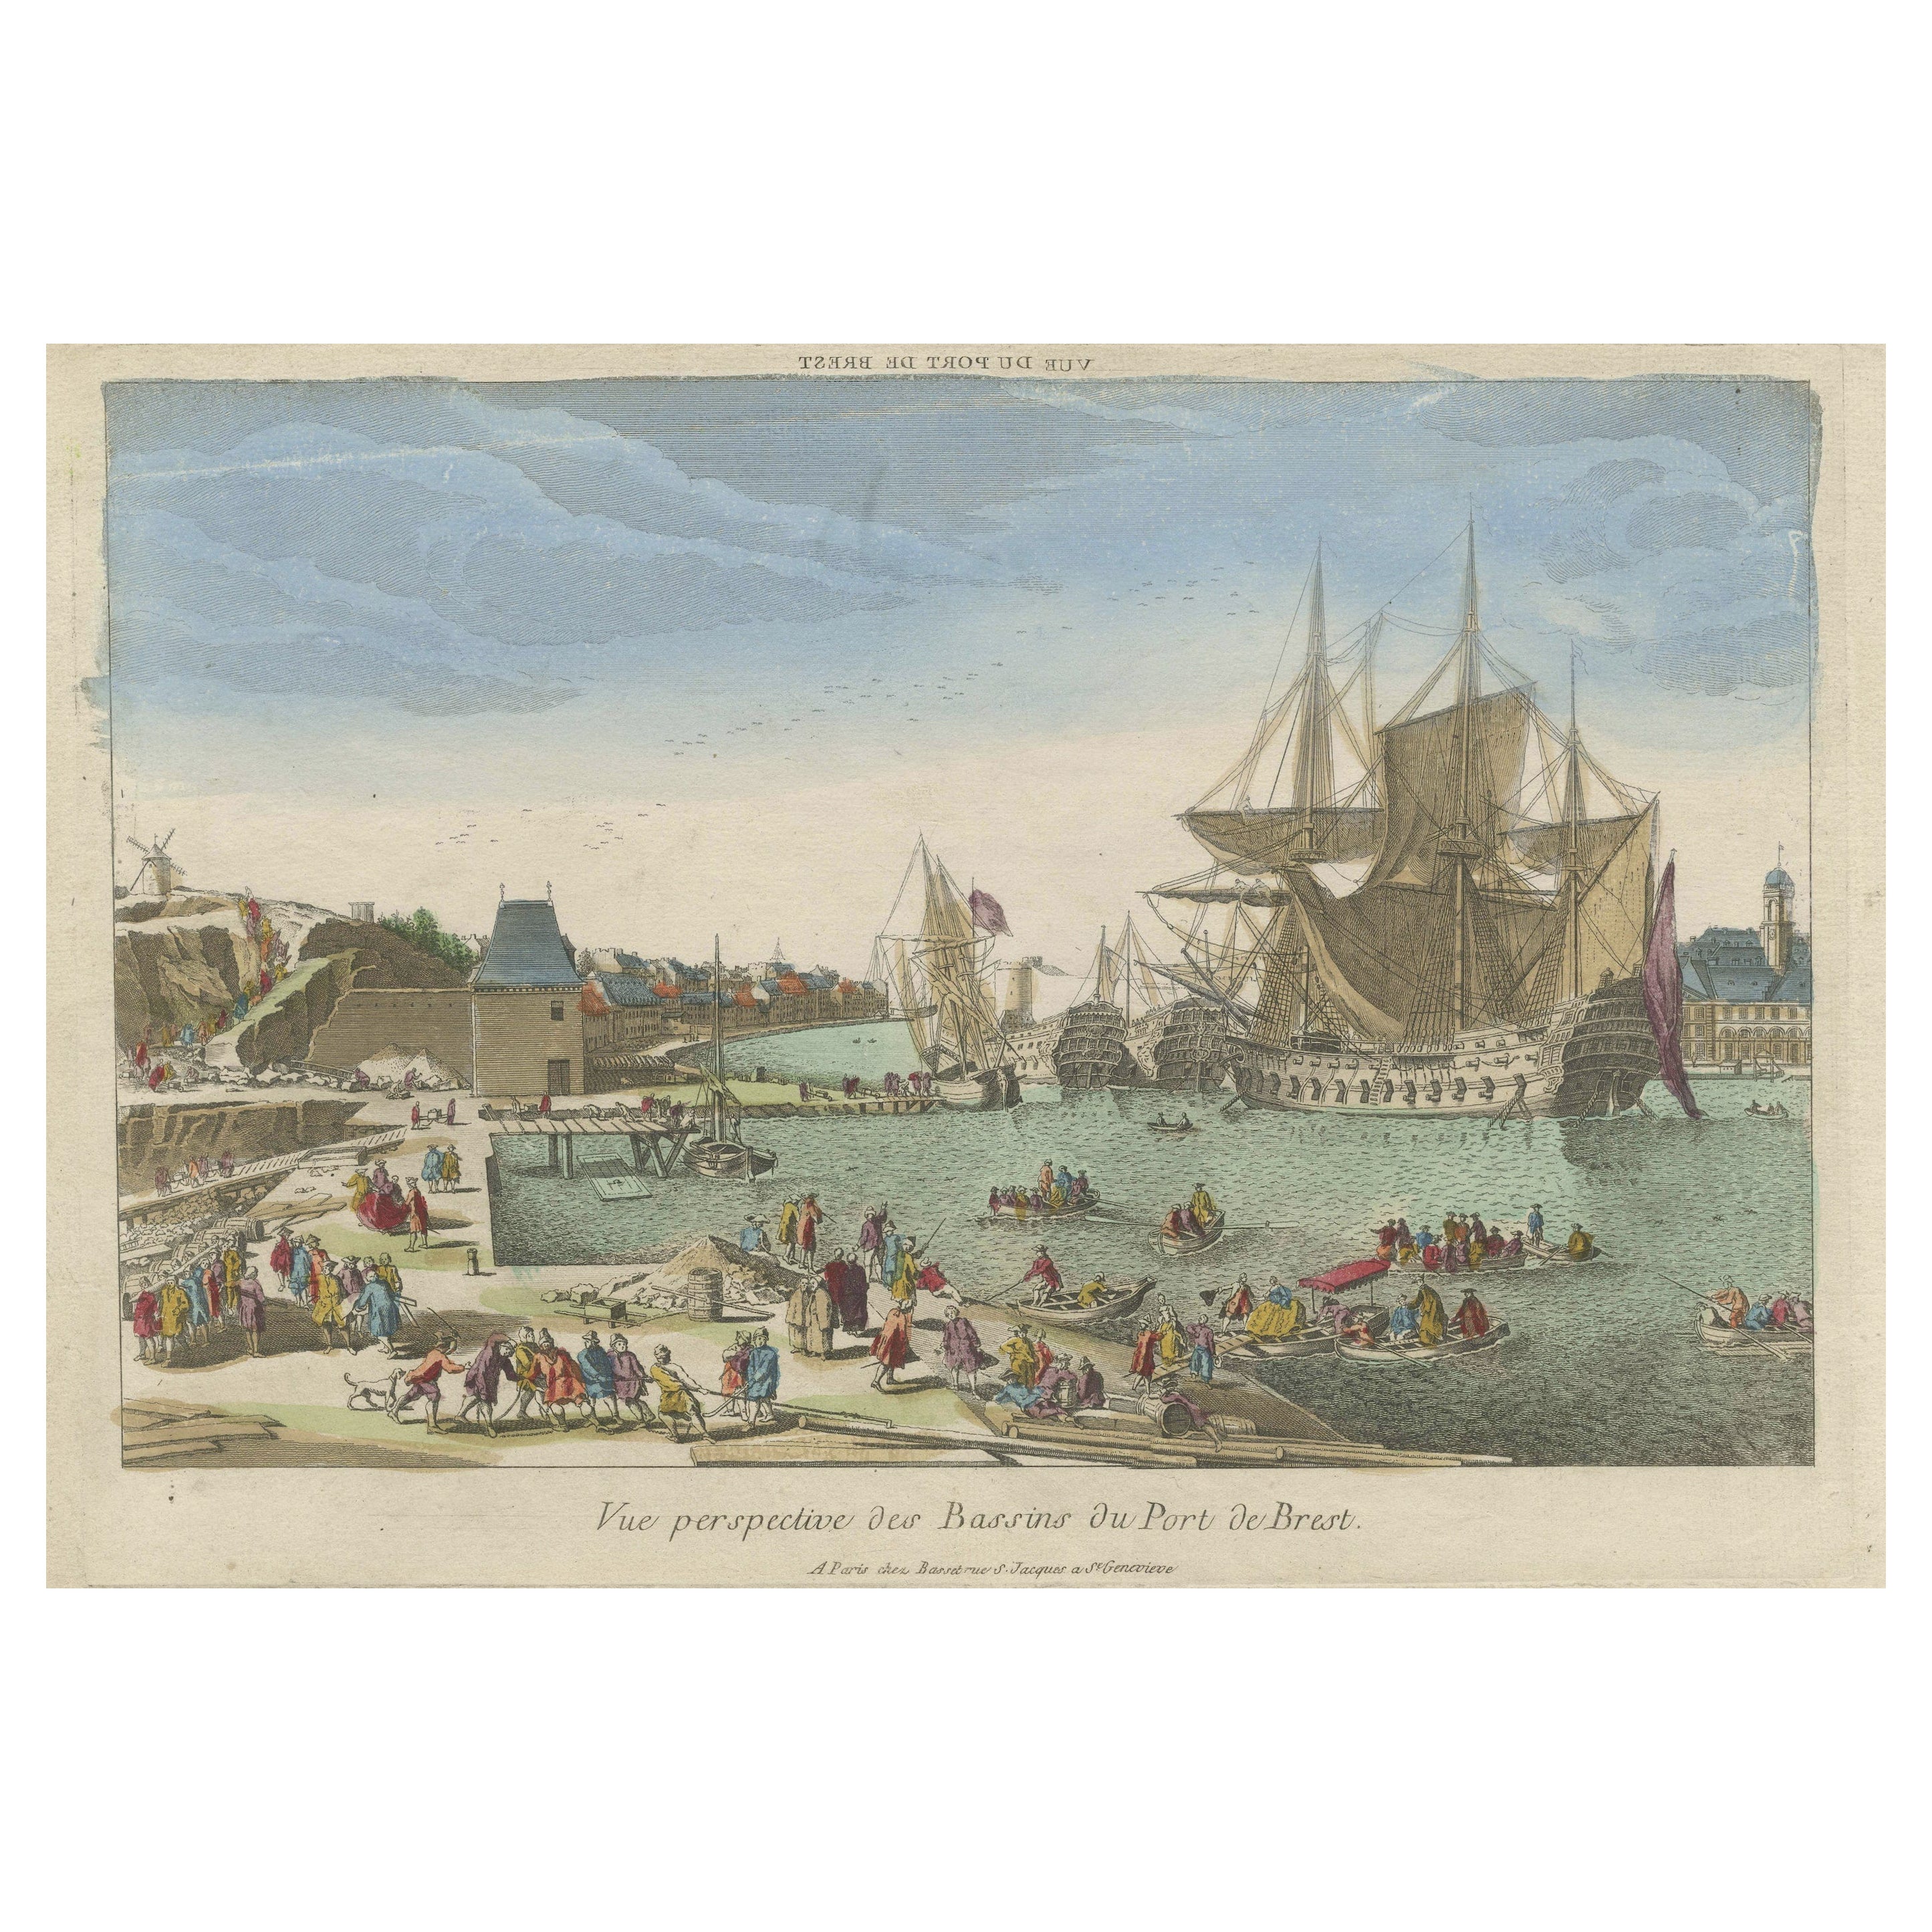 Rare Animated Hand-Colored Engraving of the French Harbour of Port City Brest